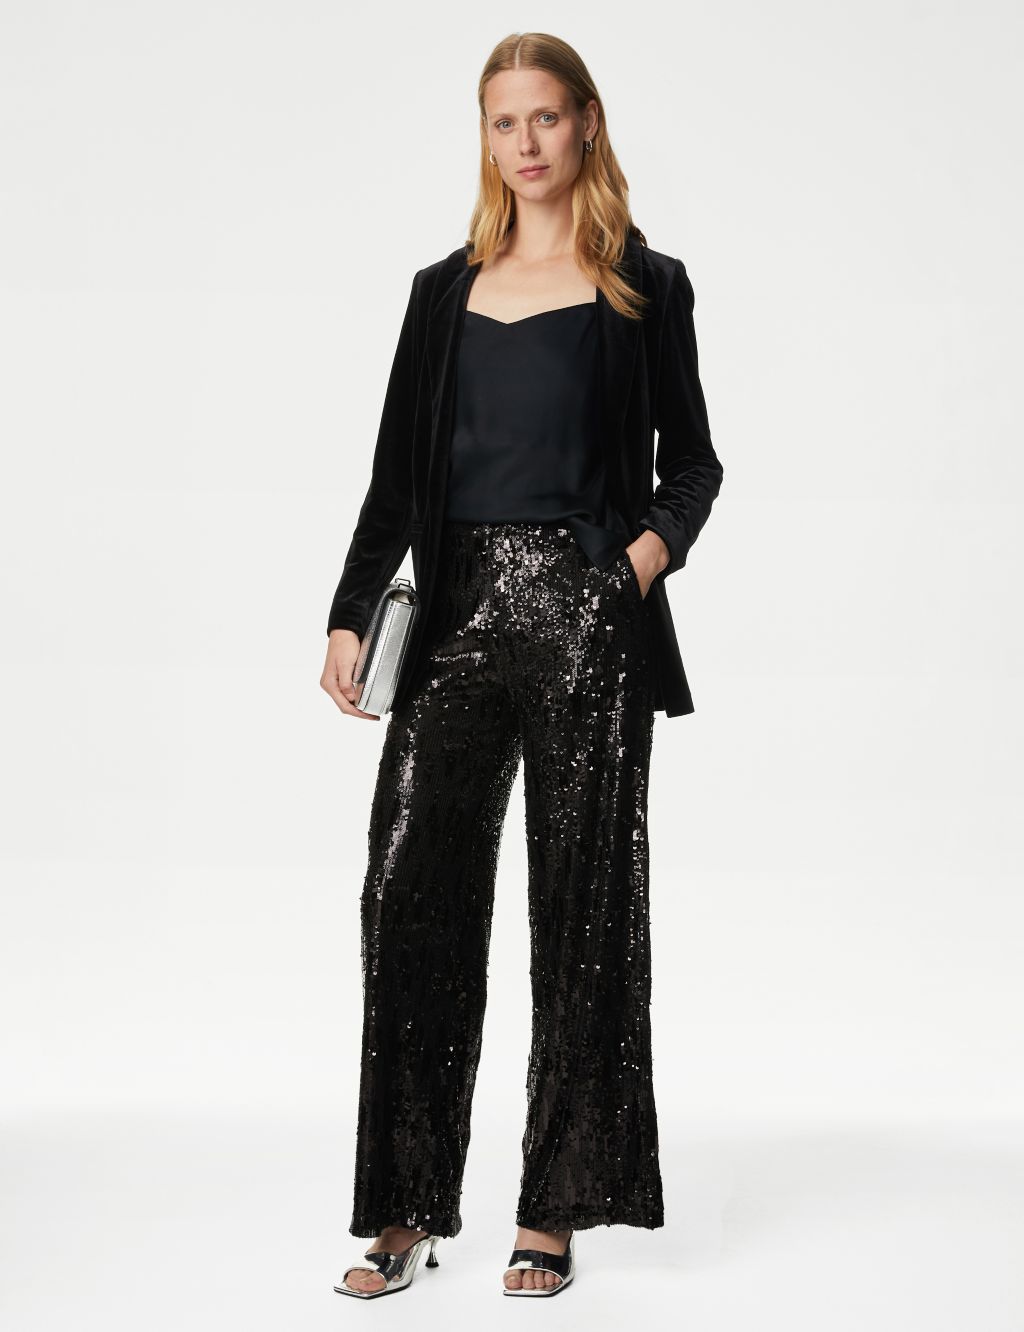 Sequin Elasticated Waist Wide Leg Trousers image 1